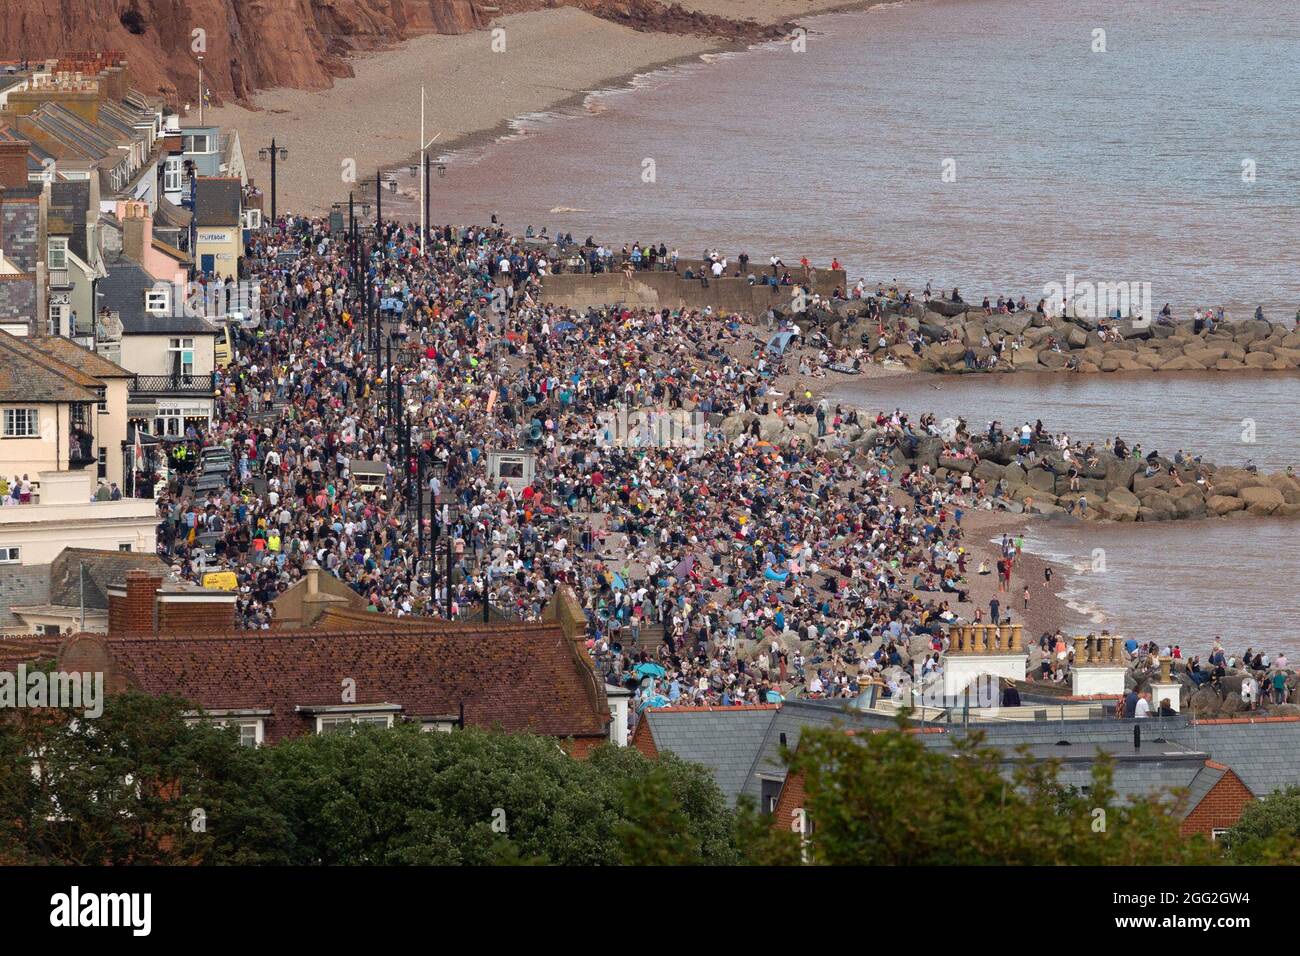 Sidmouth, Devon, UK. 27th Aug 2021.  Members of the public pack the seafront at Sidmouth in Devon to watch a spectacular display performed by the RAF Red Arrows. Credit: Ian Williams/Alamy Live News Stock Photo